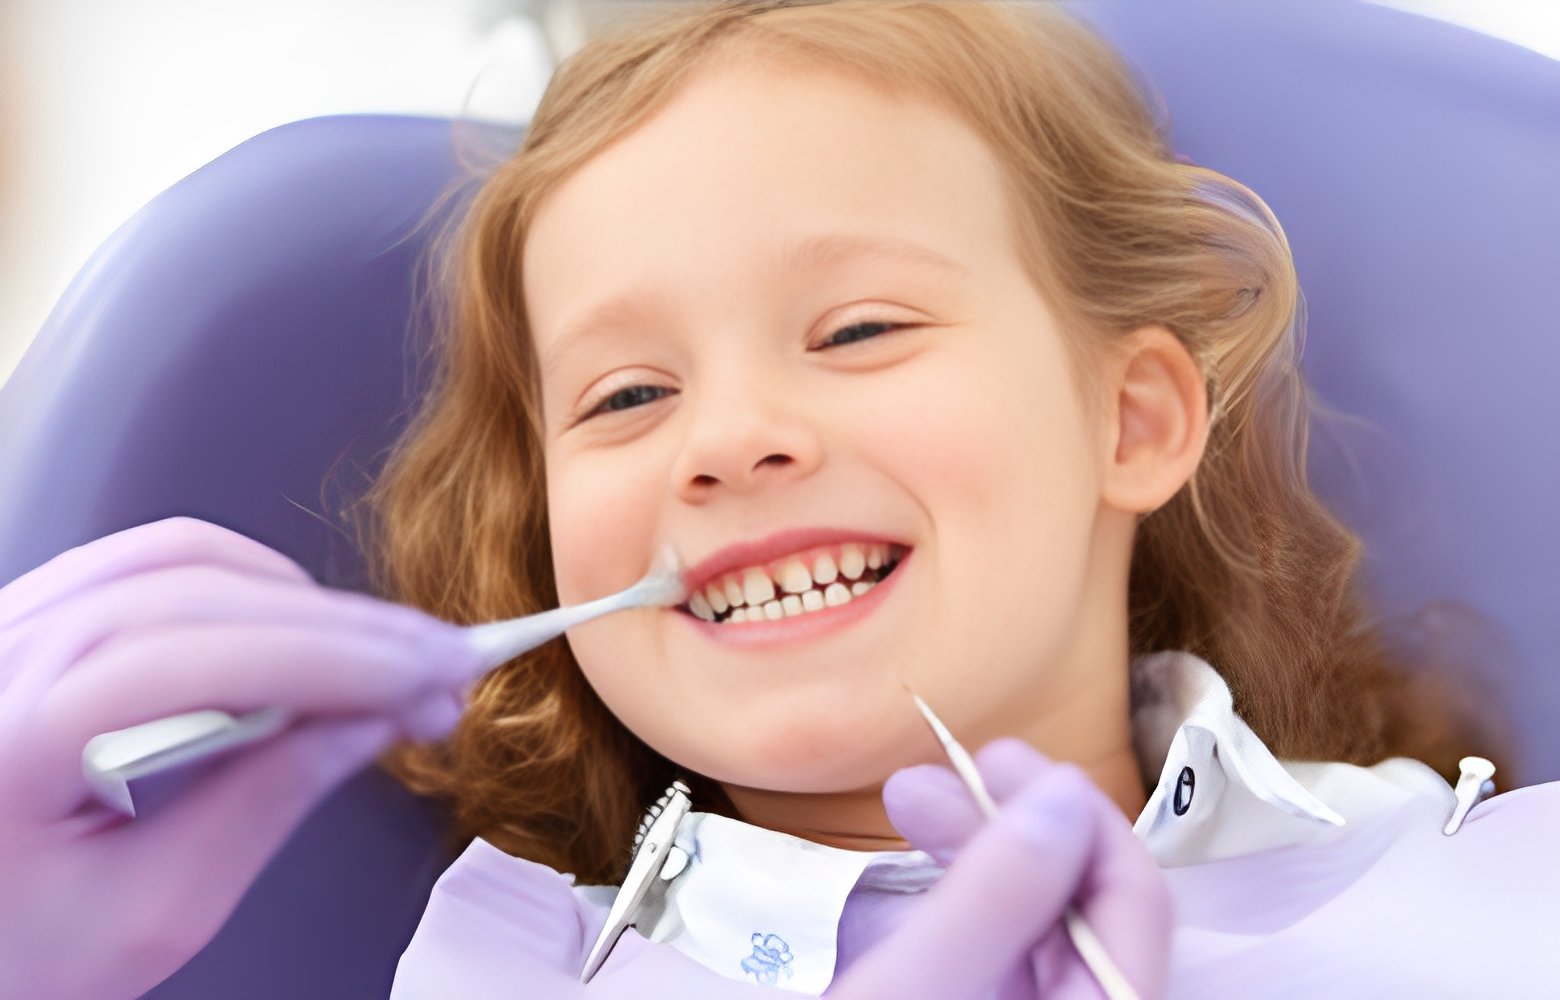 Children’s Dentistry: Laying the Foundation for Lifelong Oral Health